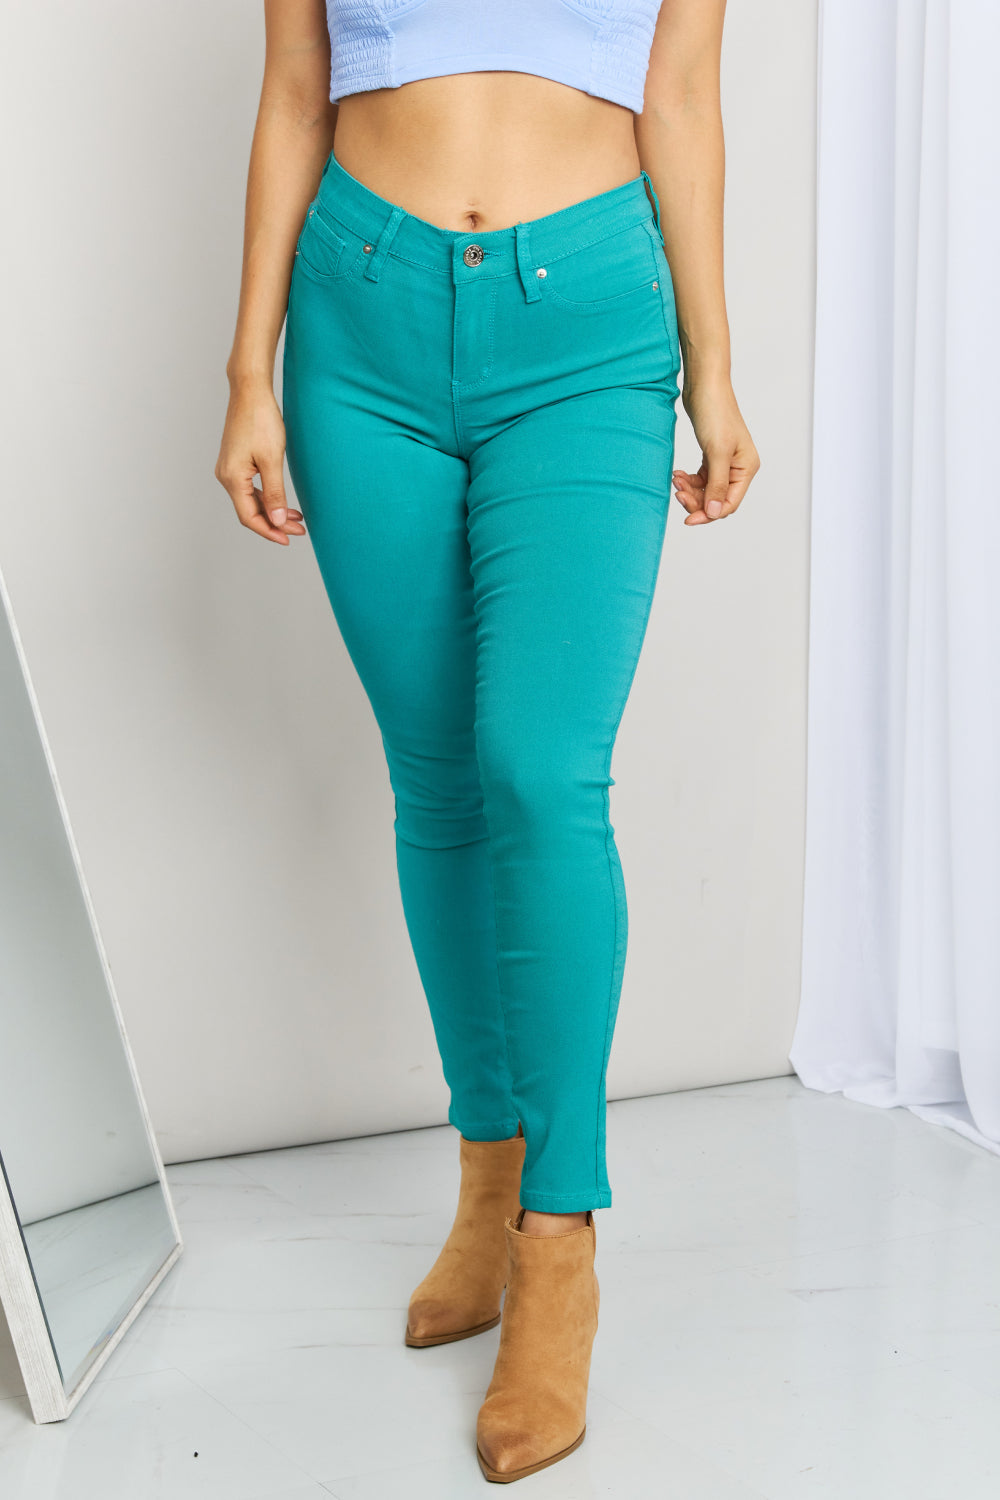 Kate Hyper-Stretch Full Size Mid-Rise Skinny Jeans in Sea Green | Jeans - CHANELIA